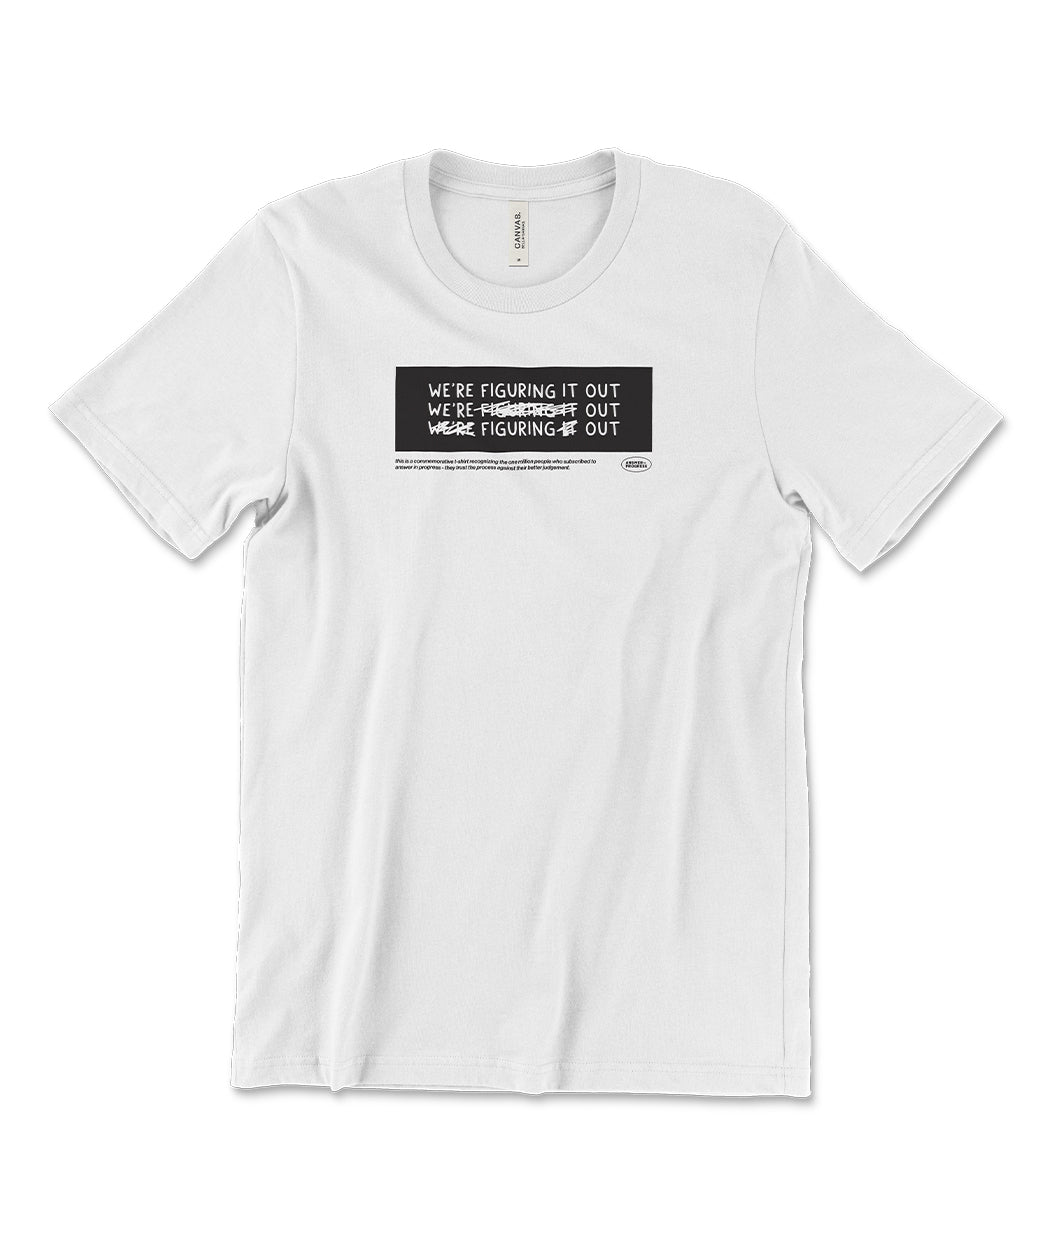 A white t-shirt with a black rectangle in the center with the words "We're figuring it out" written three times in a row with the second line has "figuring" crossed out and the third line has "we're" and "it" crossed out. There is additional small text below this. From Answer in Progress.